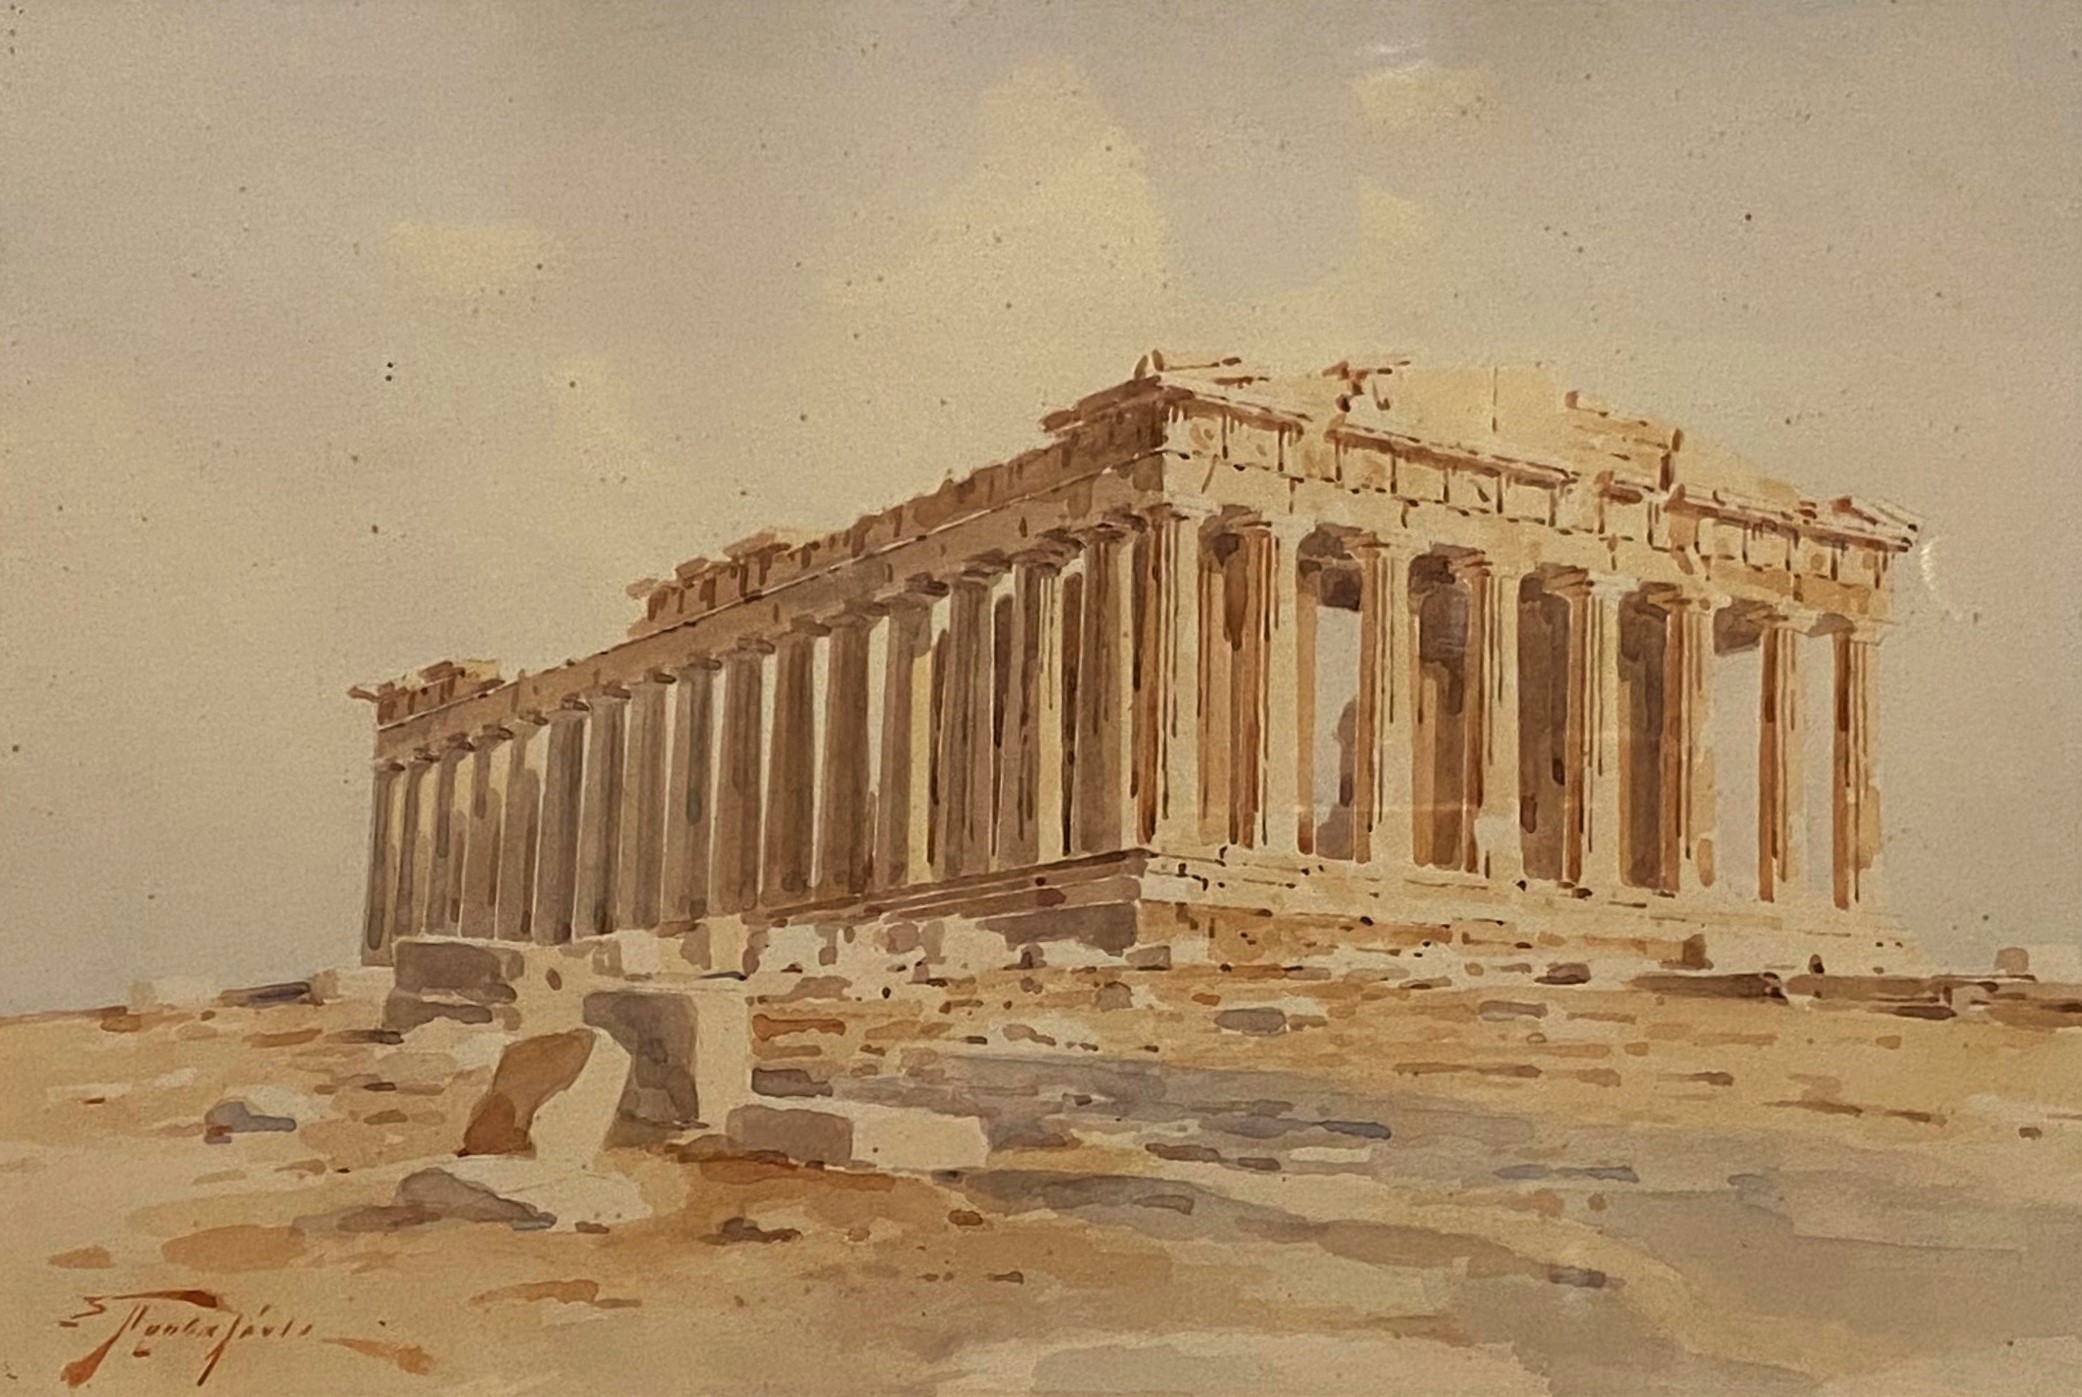 A watercolor on paper signed S. Prosalentis in Greek, Parthenon, Athens, Greece. 20 x 29 cm